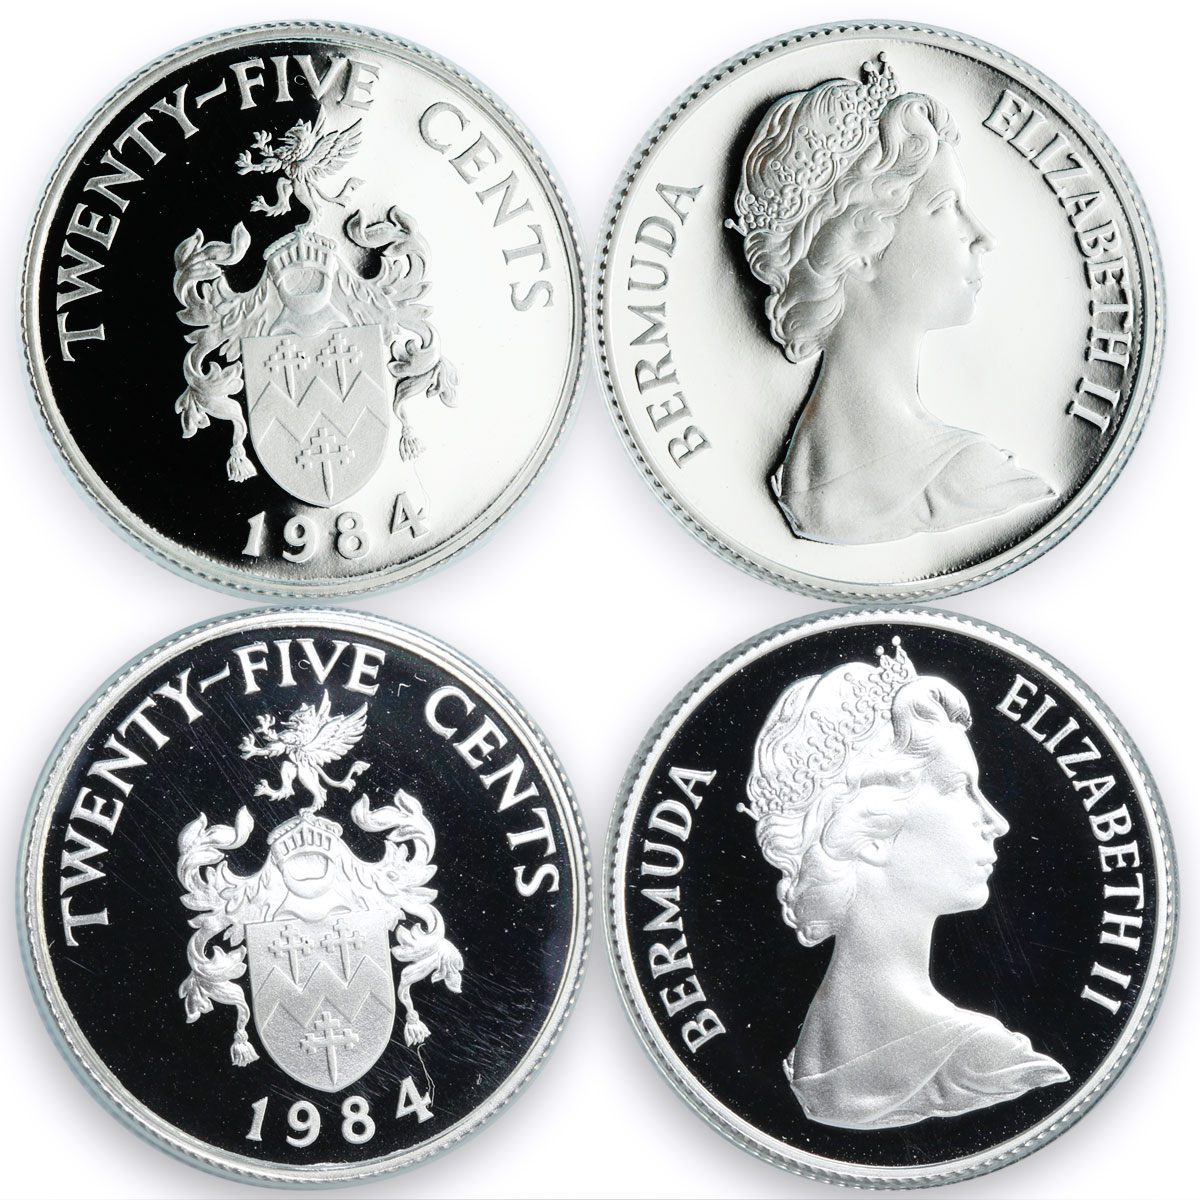 Bermuda set of 11 coins 375th Anniversary of the Settlement silver coins 1984